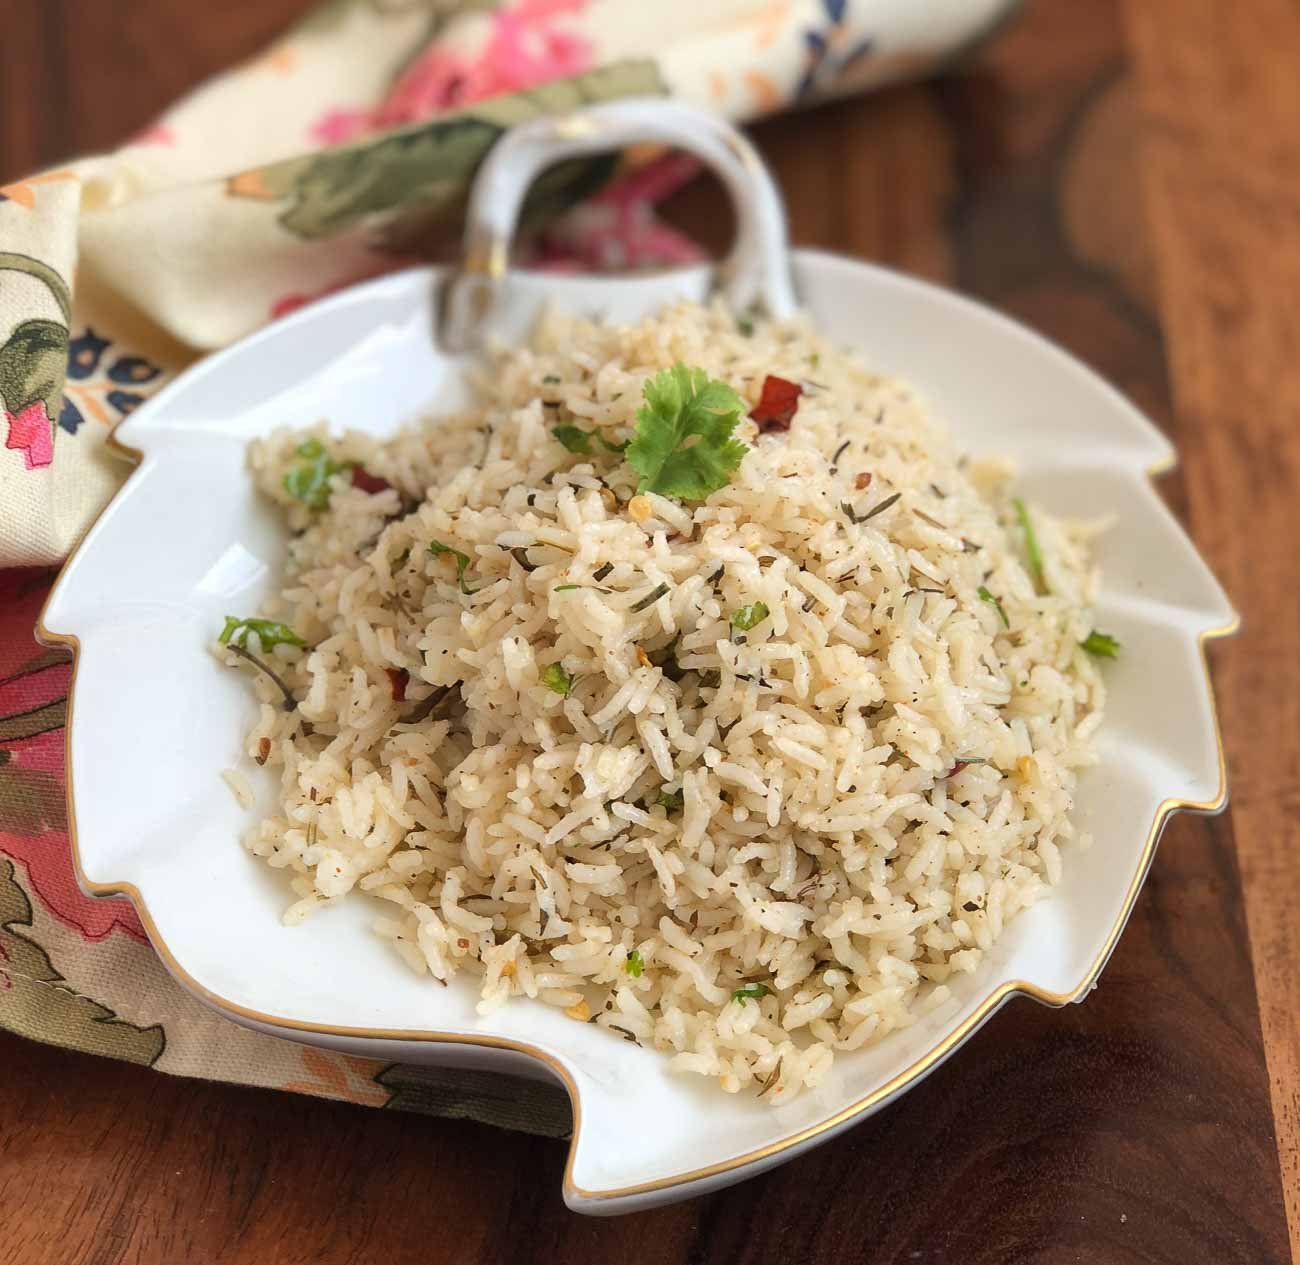 Herbed Butter Rice Recipe With Rosemary & Thyme